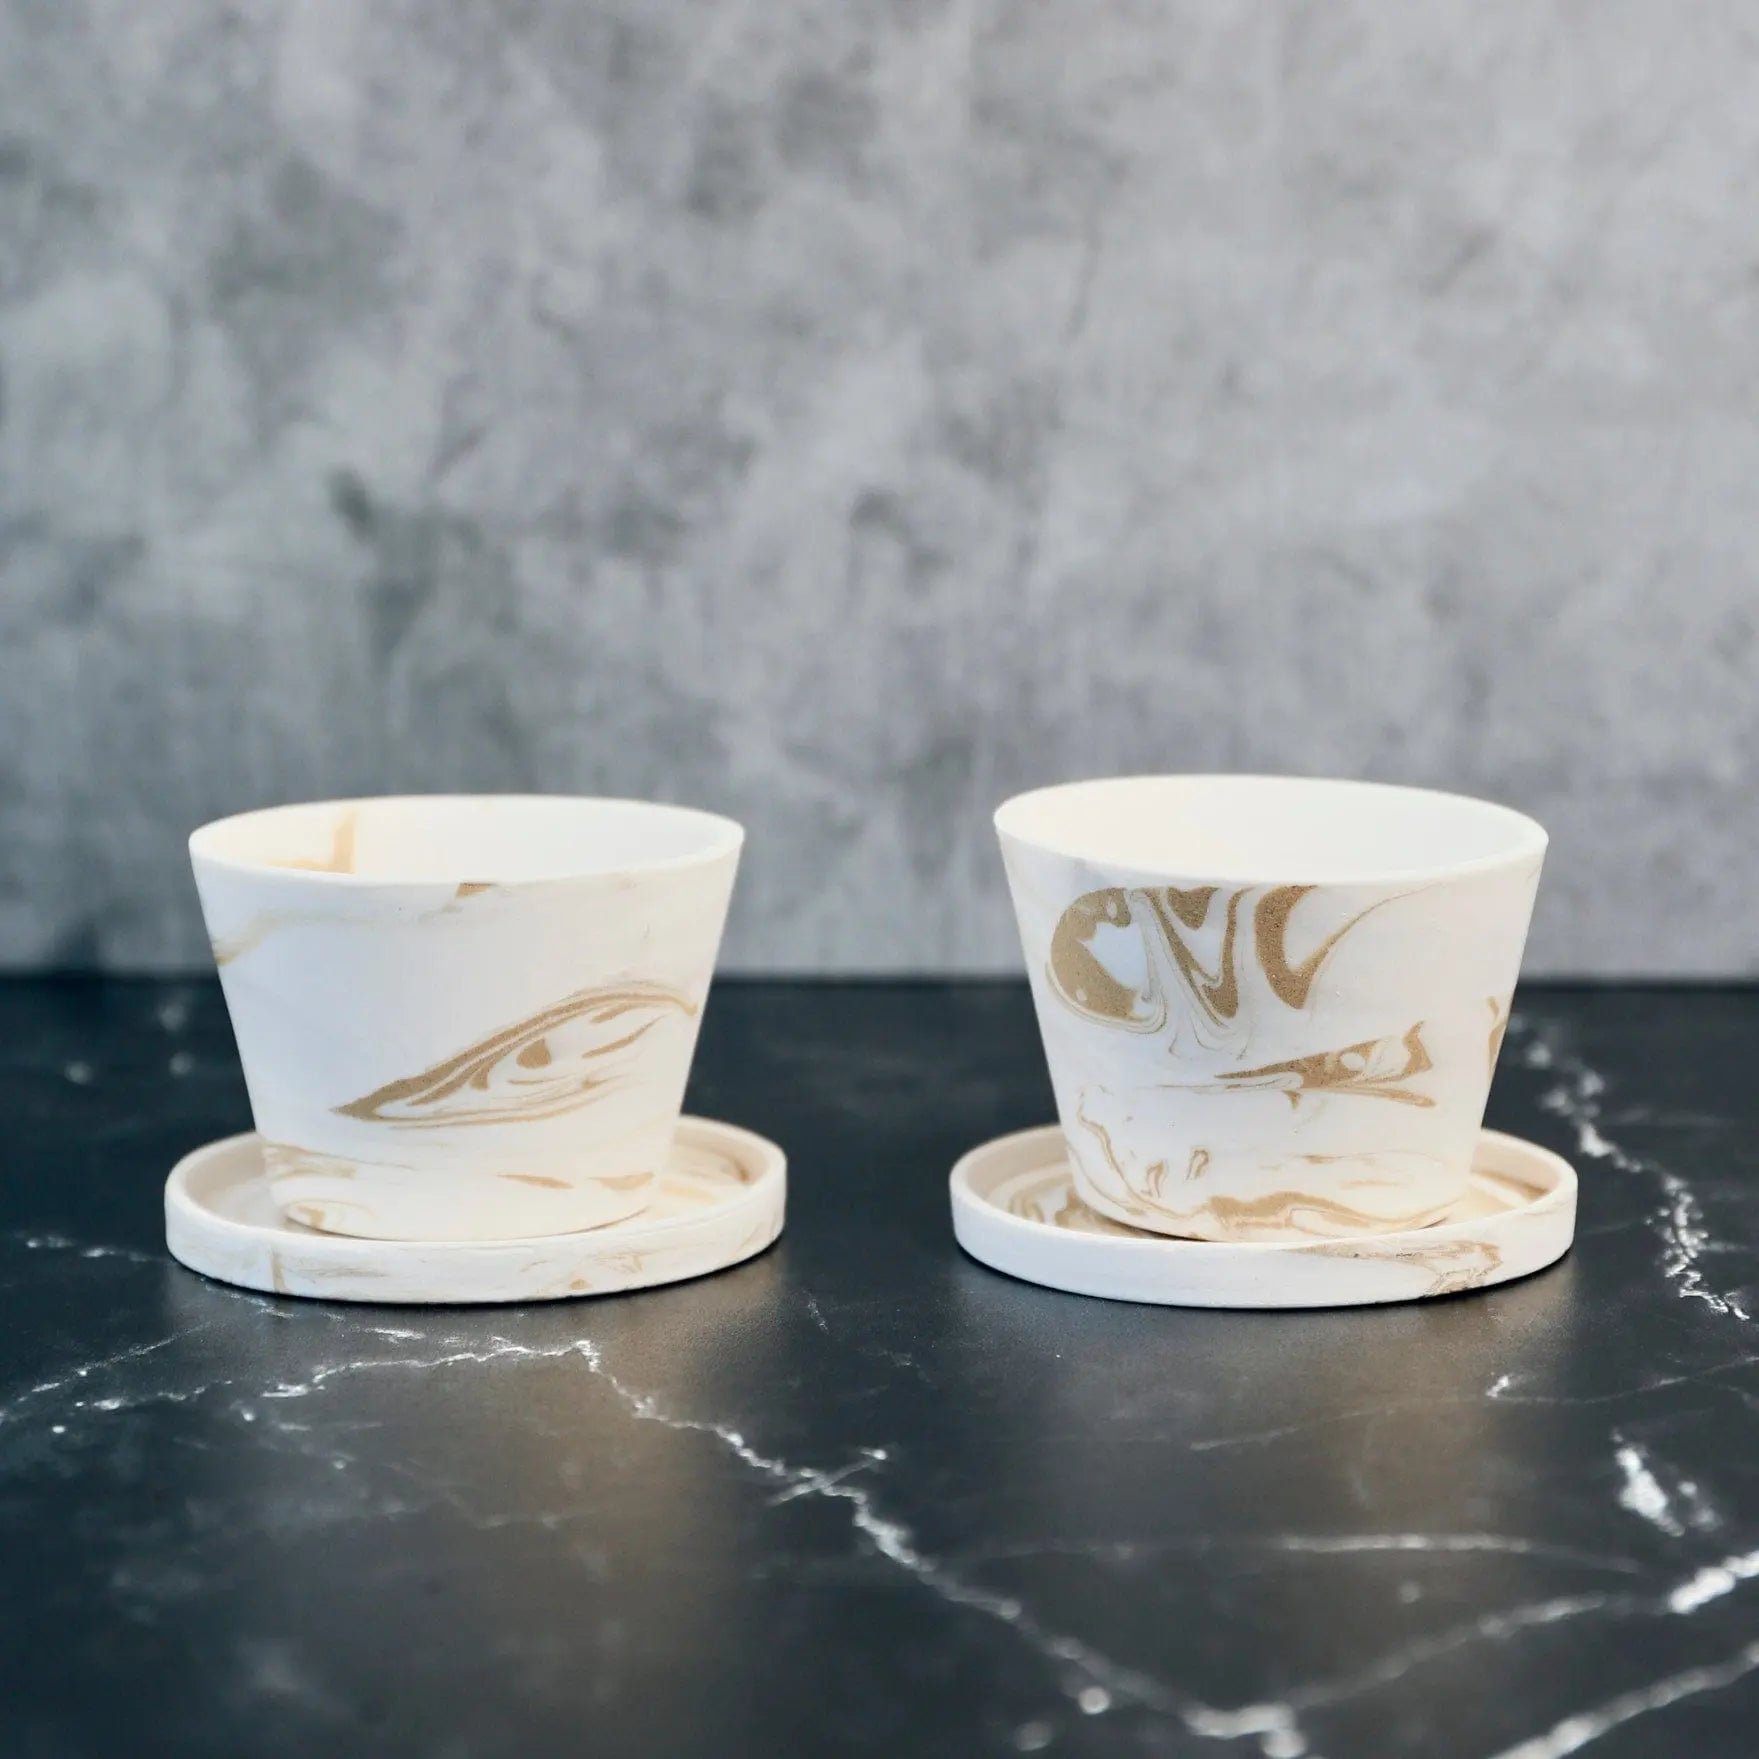 Splatter Espresso Cup and Saucer by Fasanoceramiche